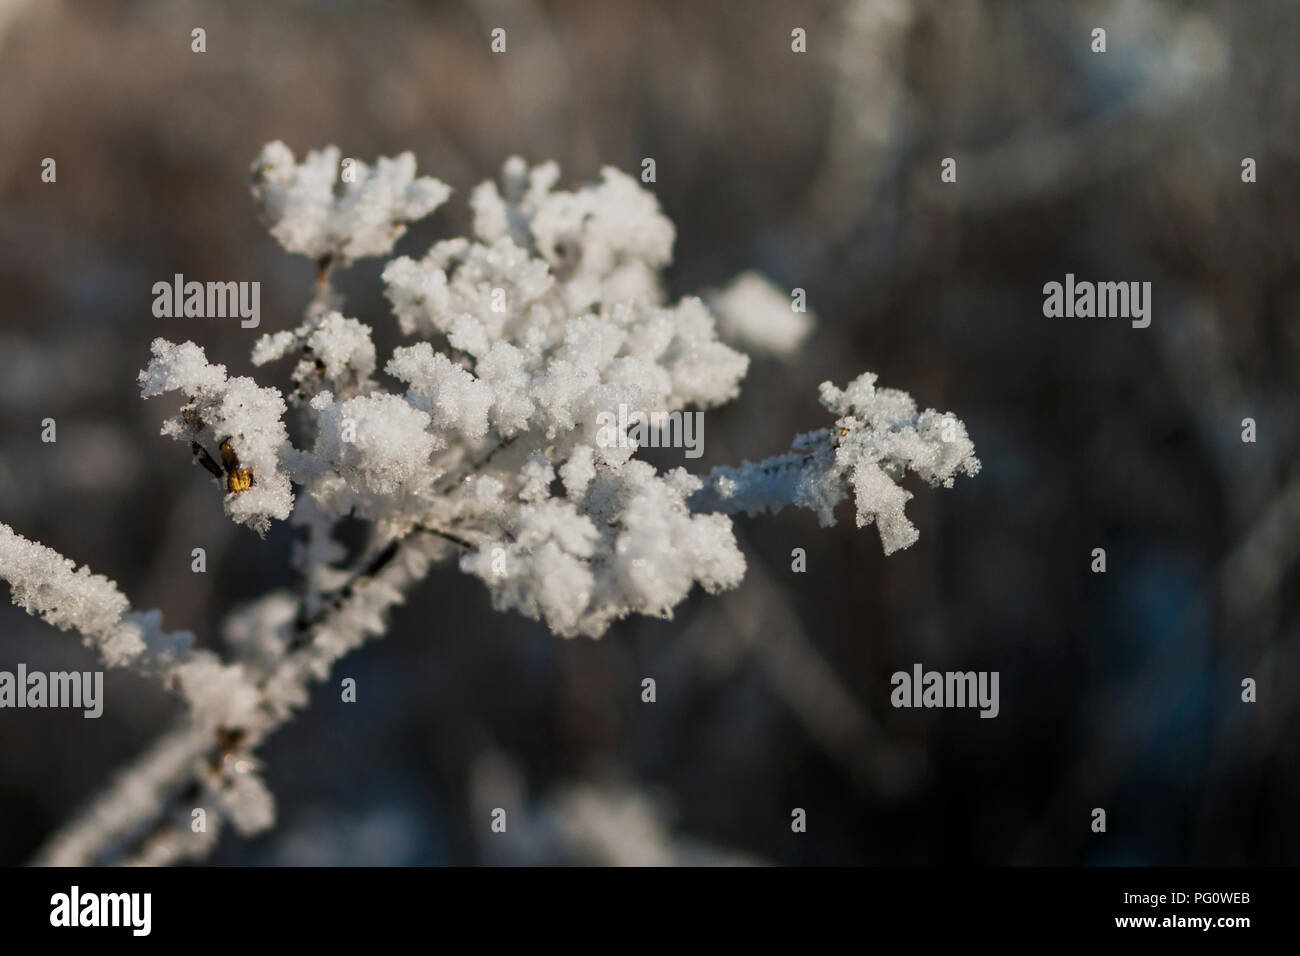 Winter Theme Concept: Closeup Of Frosted Weeds Branch Under The Snow, Blurred Background Stock Photo